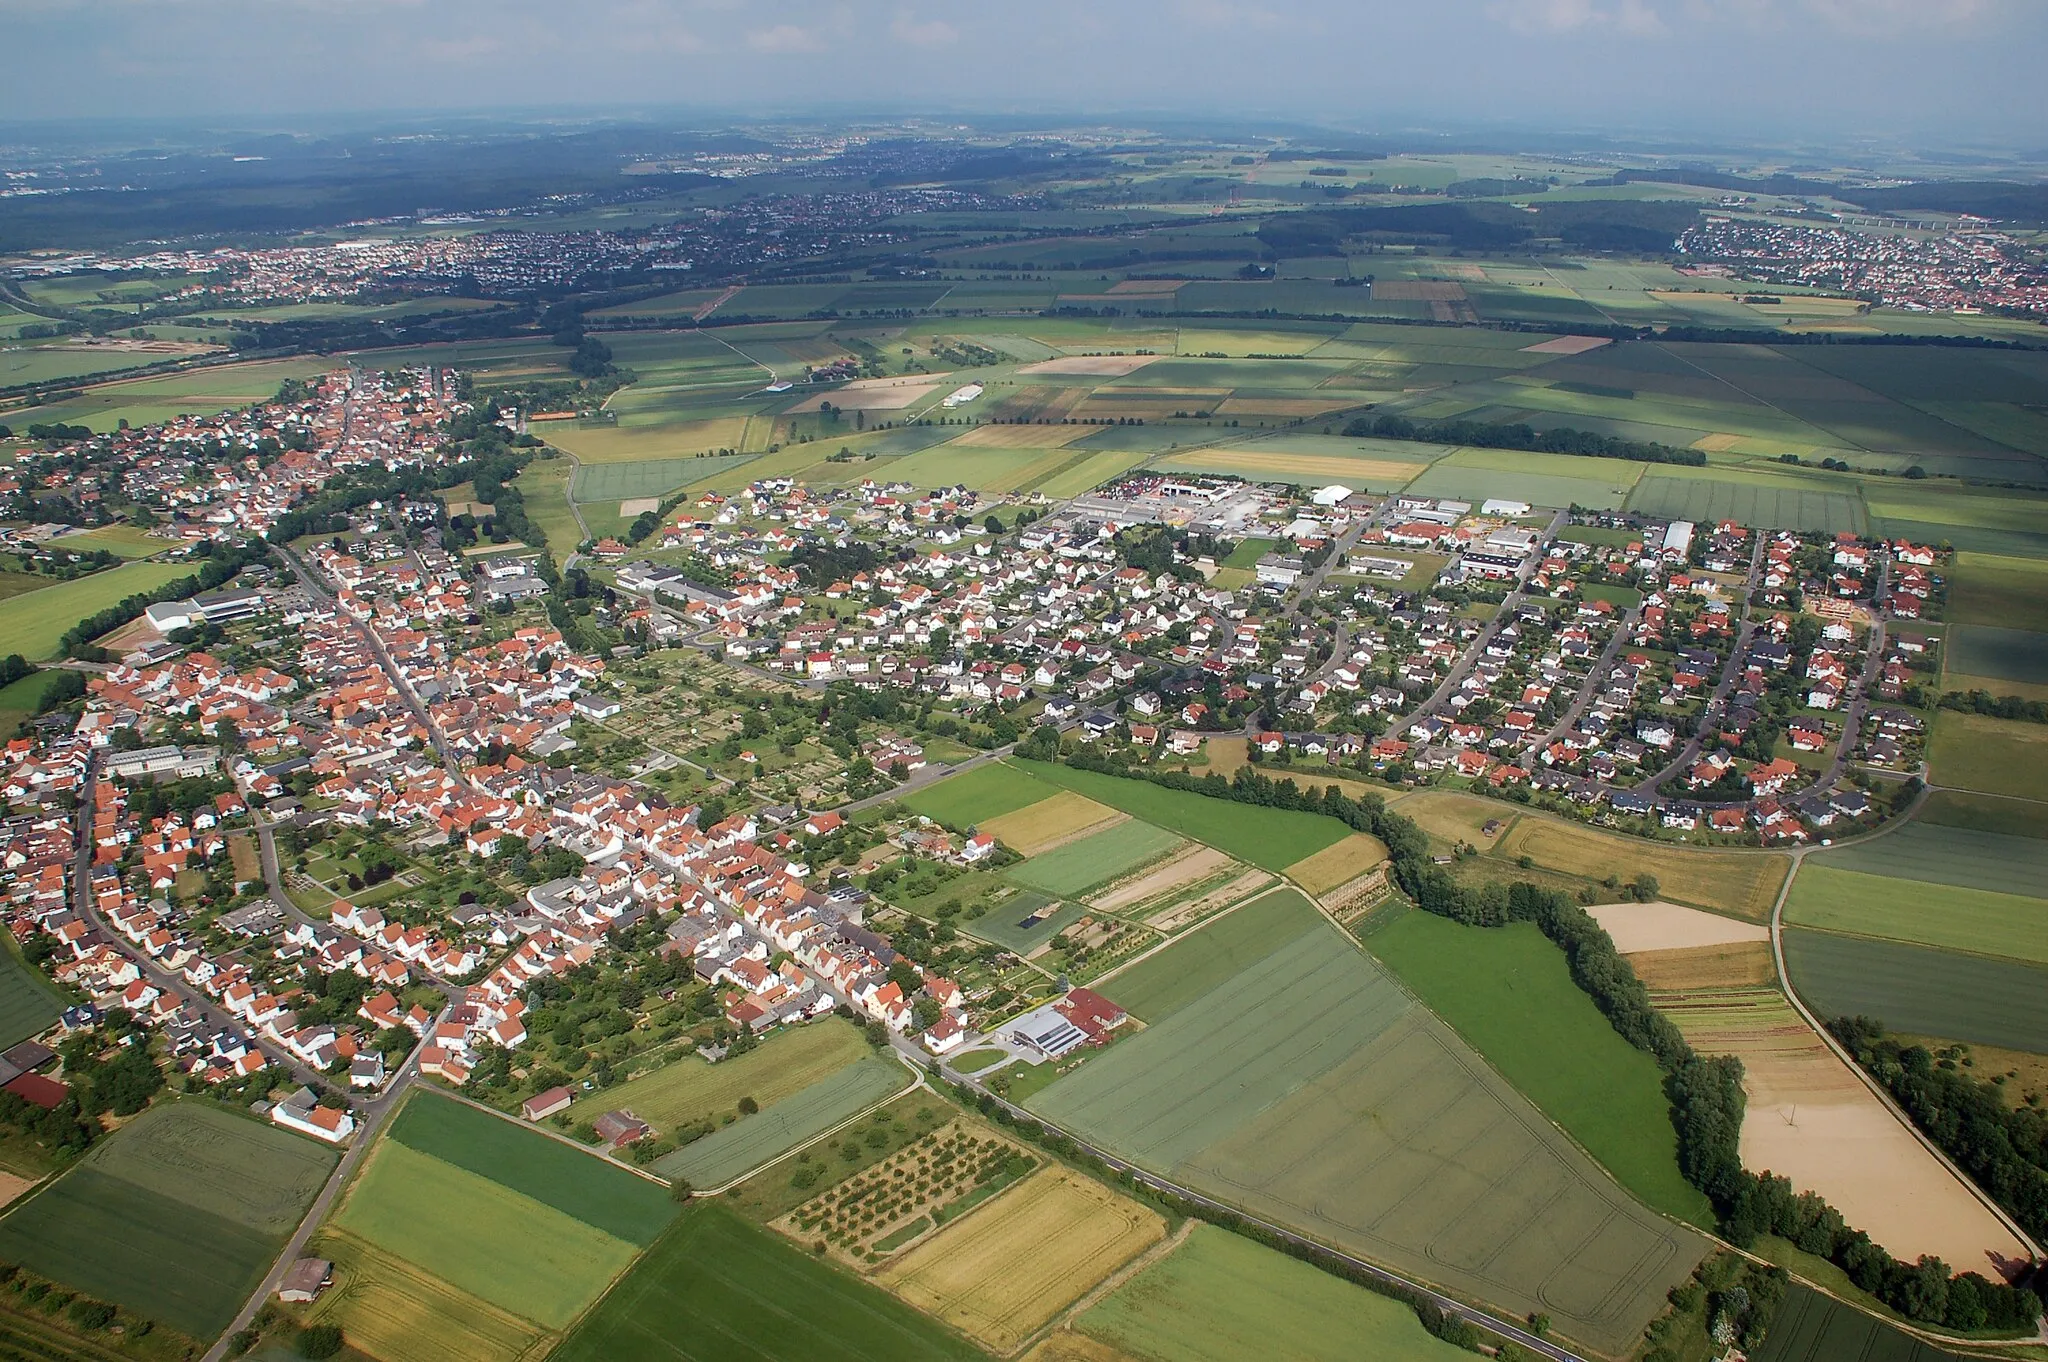 Photo showing: Aerial photograph of Hüttenberg, Hessen, Germany